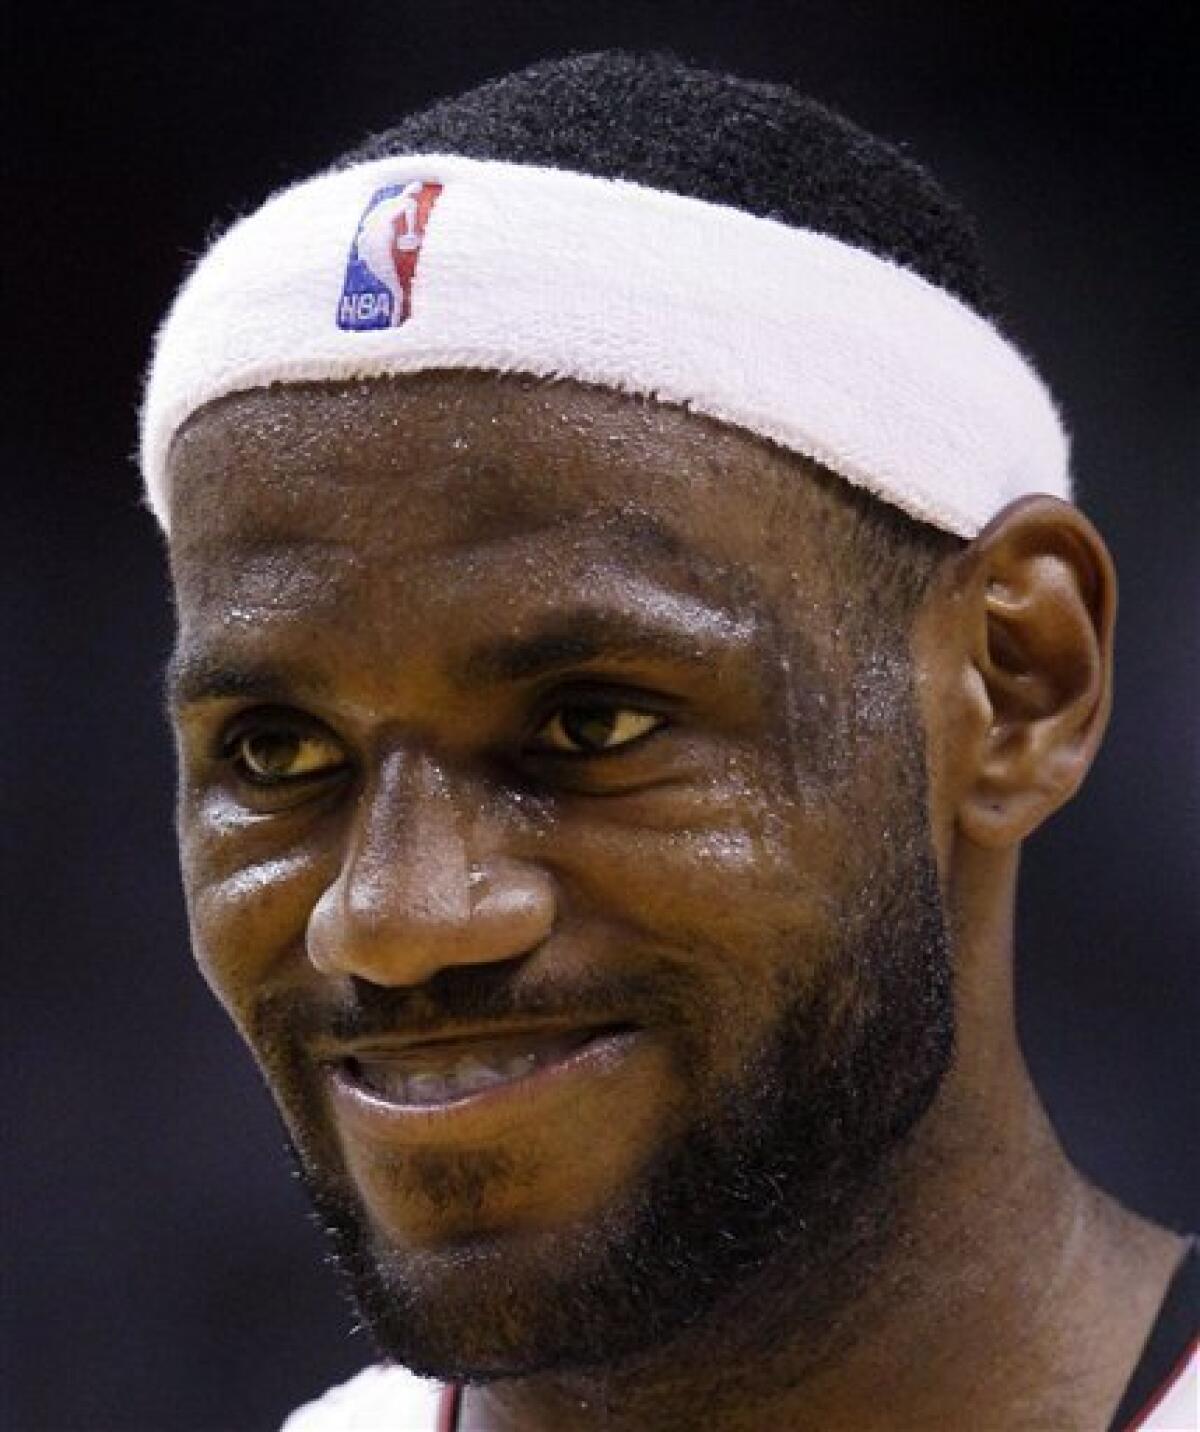 How Good Will LeBron James And The Miami Heat Be In 2011? Hint: Very Good 